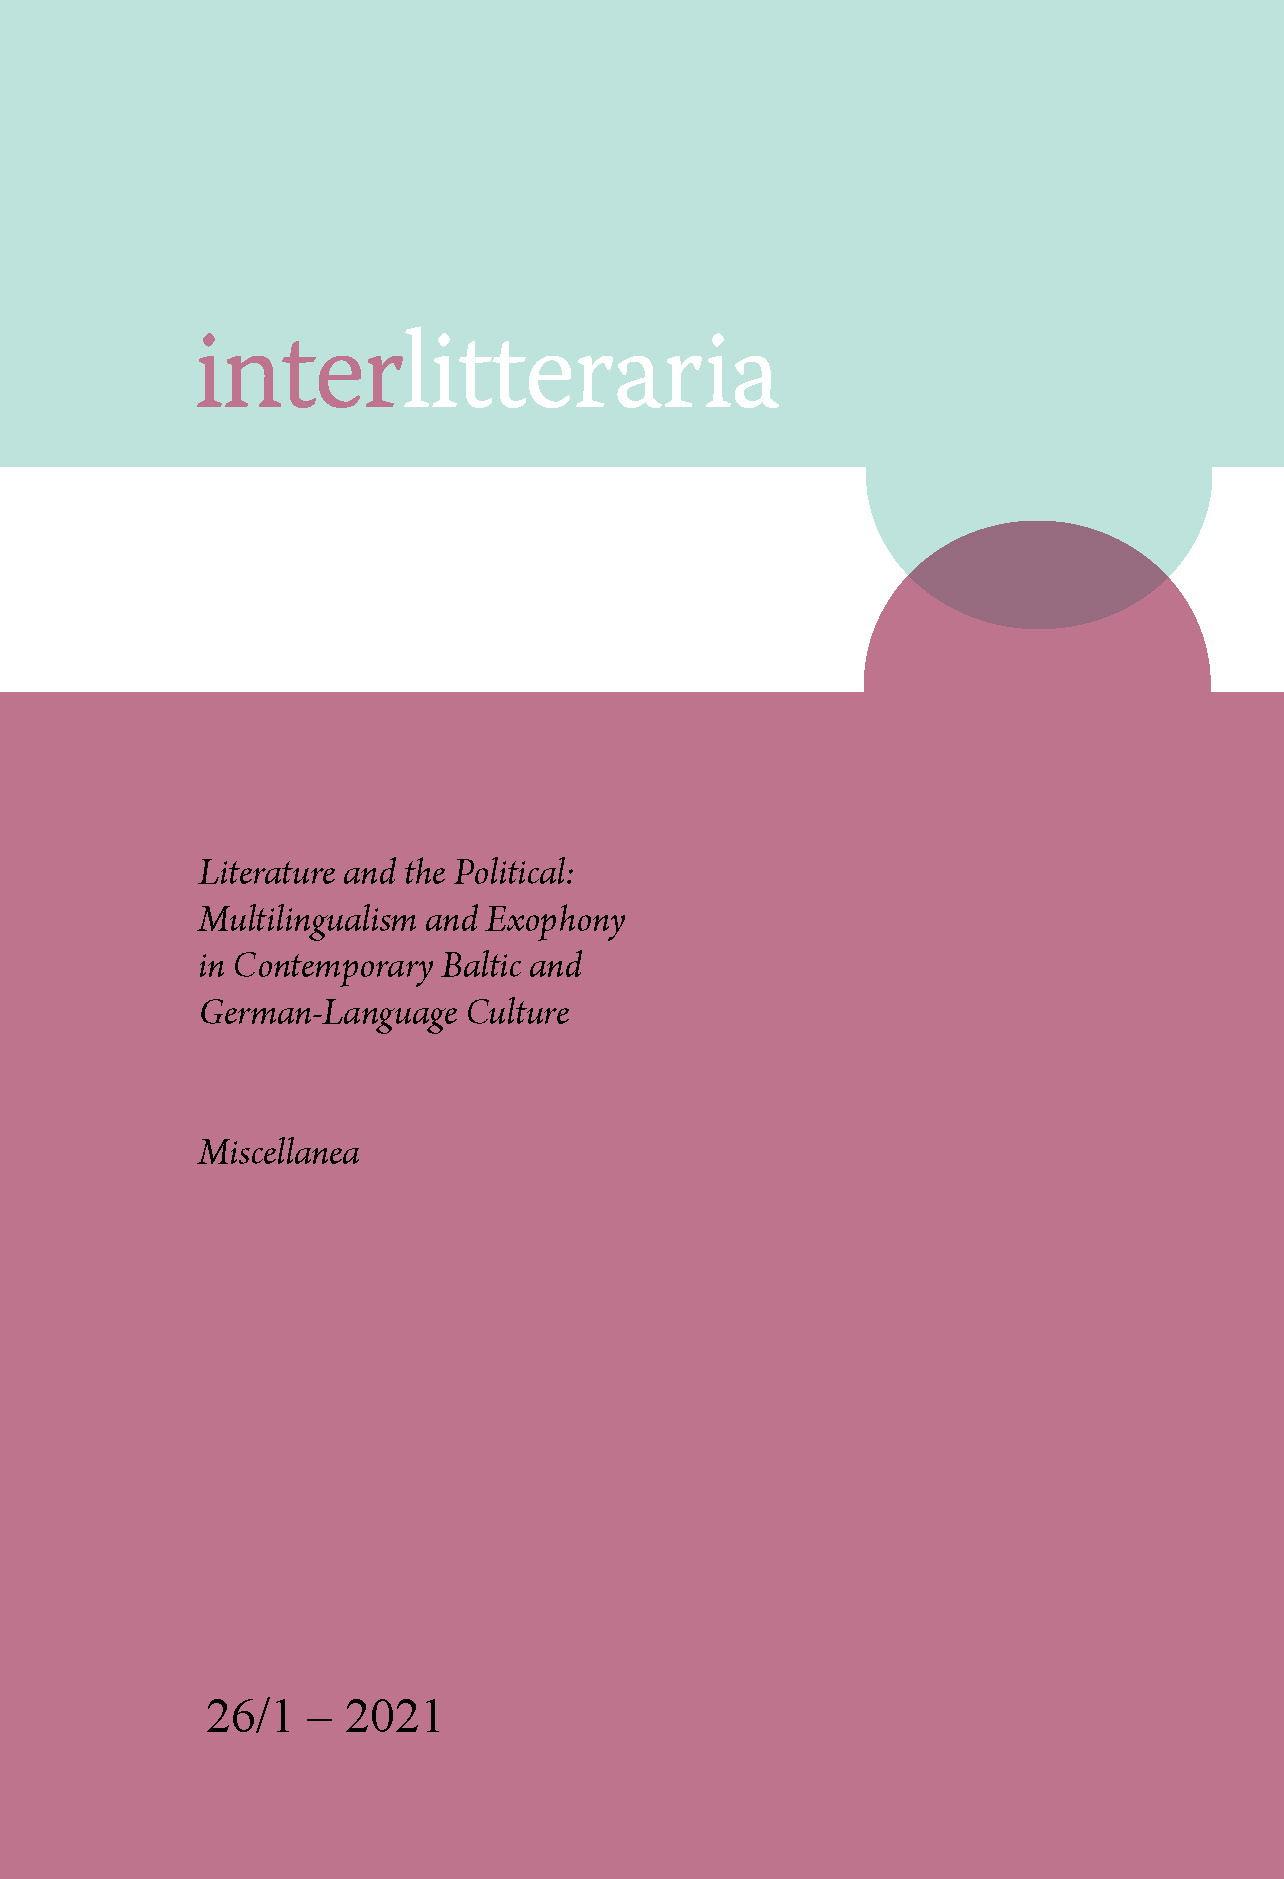 					View Vol. 26 No. 1 (2021): Literature and the Political: Multilingualism and Exophony in Contemporary Baltic and German-Language Culture. Miscellanea
				